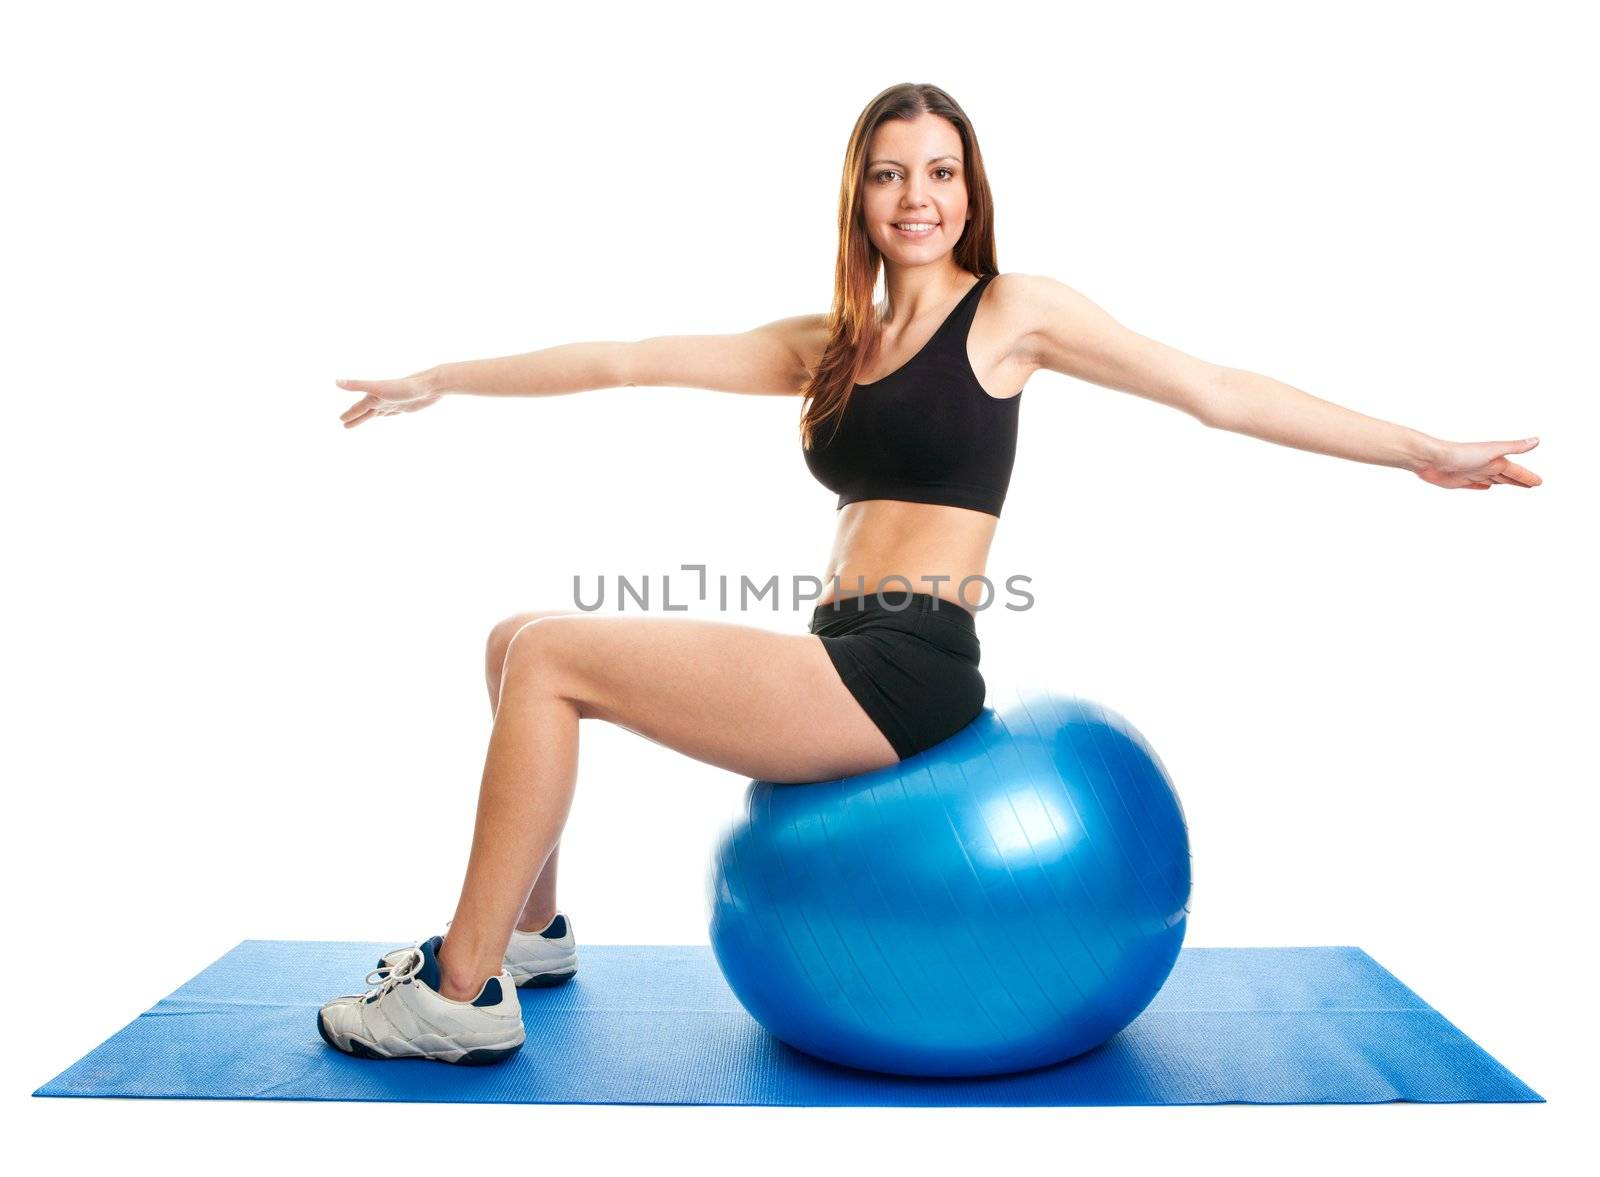 Fitness woman stretshing on fitness ball. Isolated on white